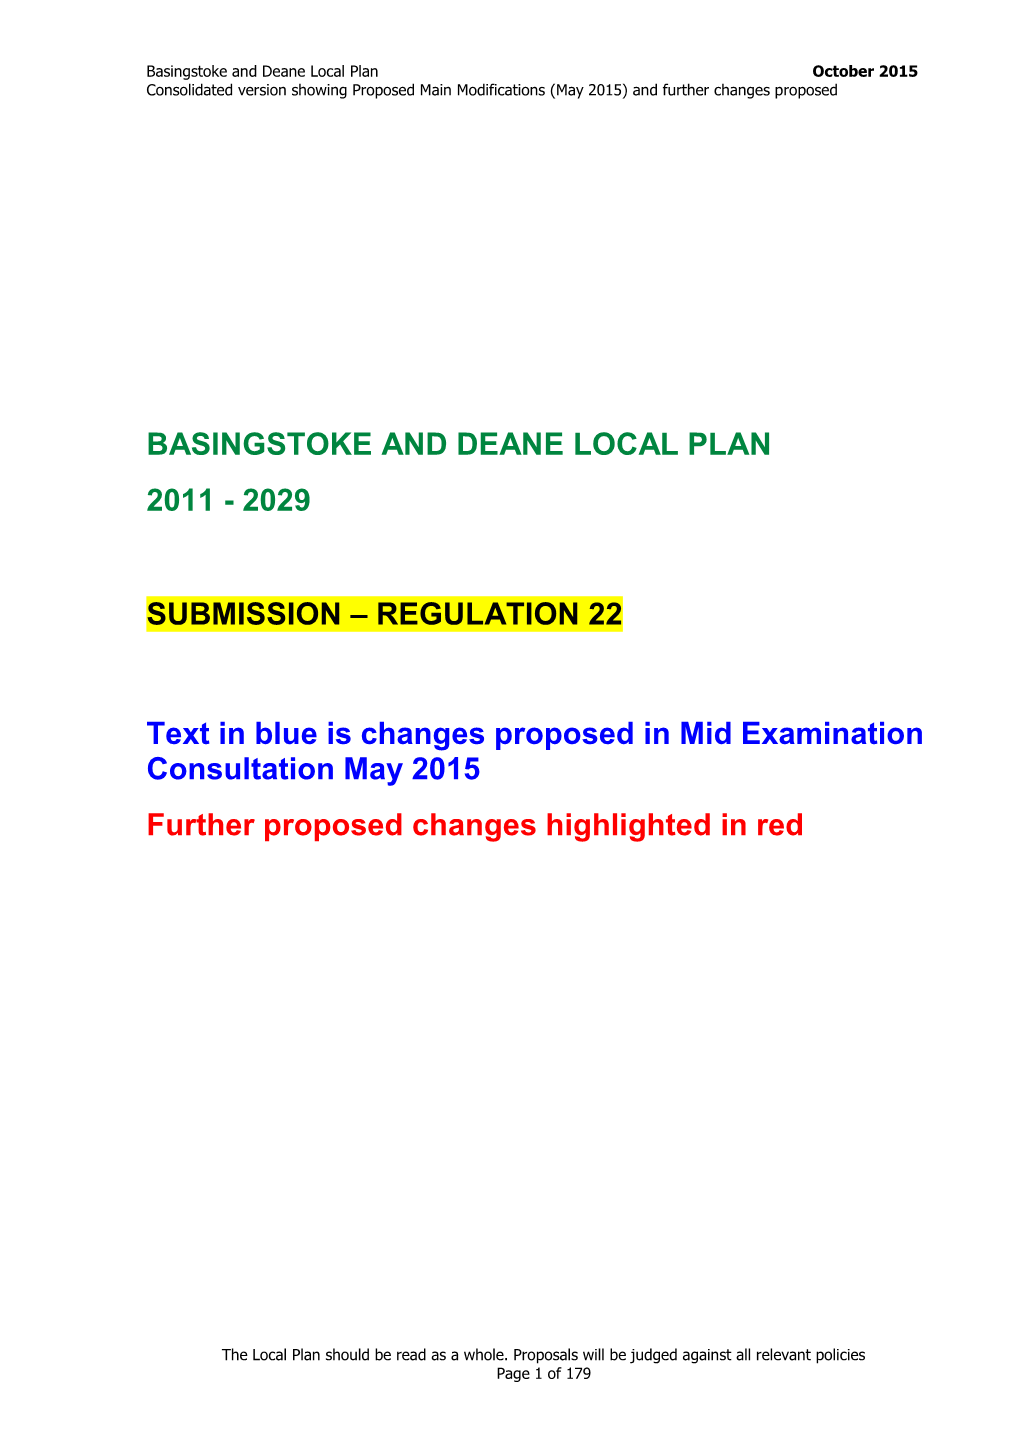 Basingstoke and Deane Local Plan 2011-2029 – Consolidated Version